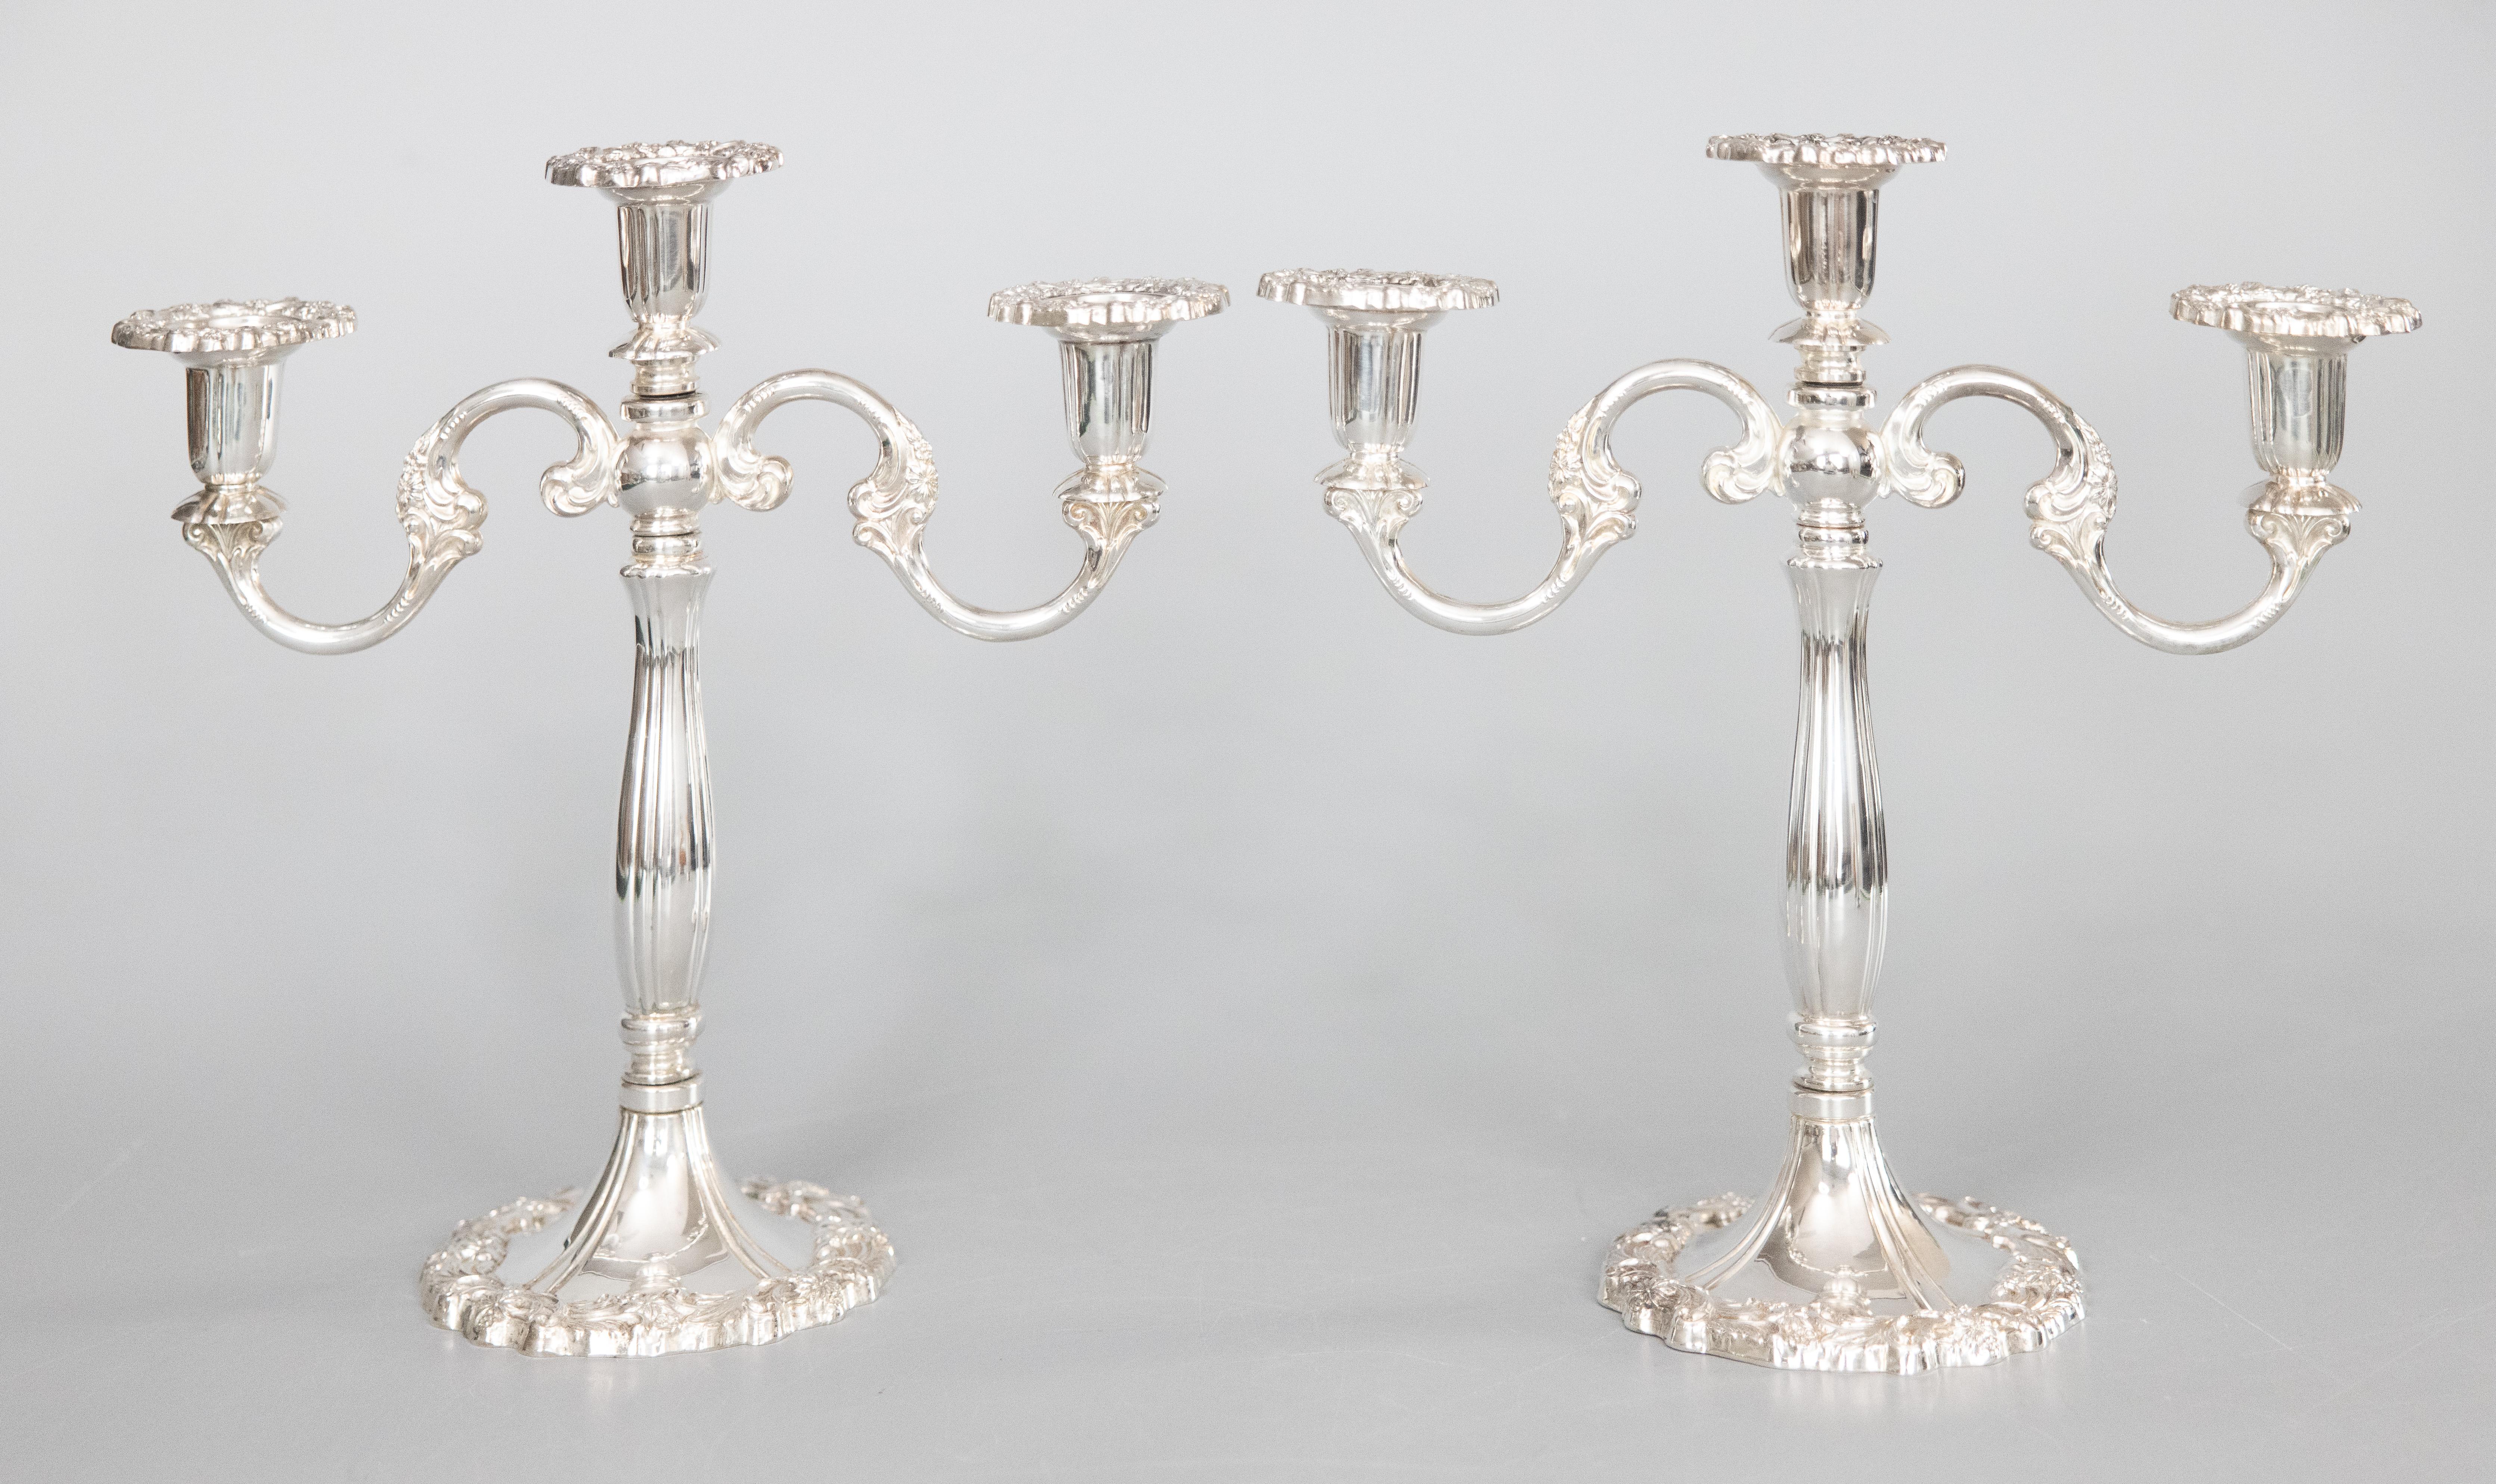 A lovely pair of Rococo style silverplate three light candelabras made in Italy, circa 1950. Marked 